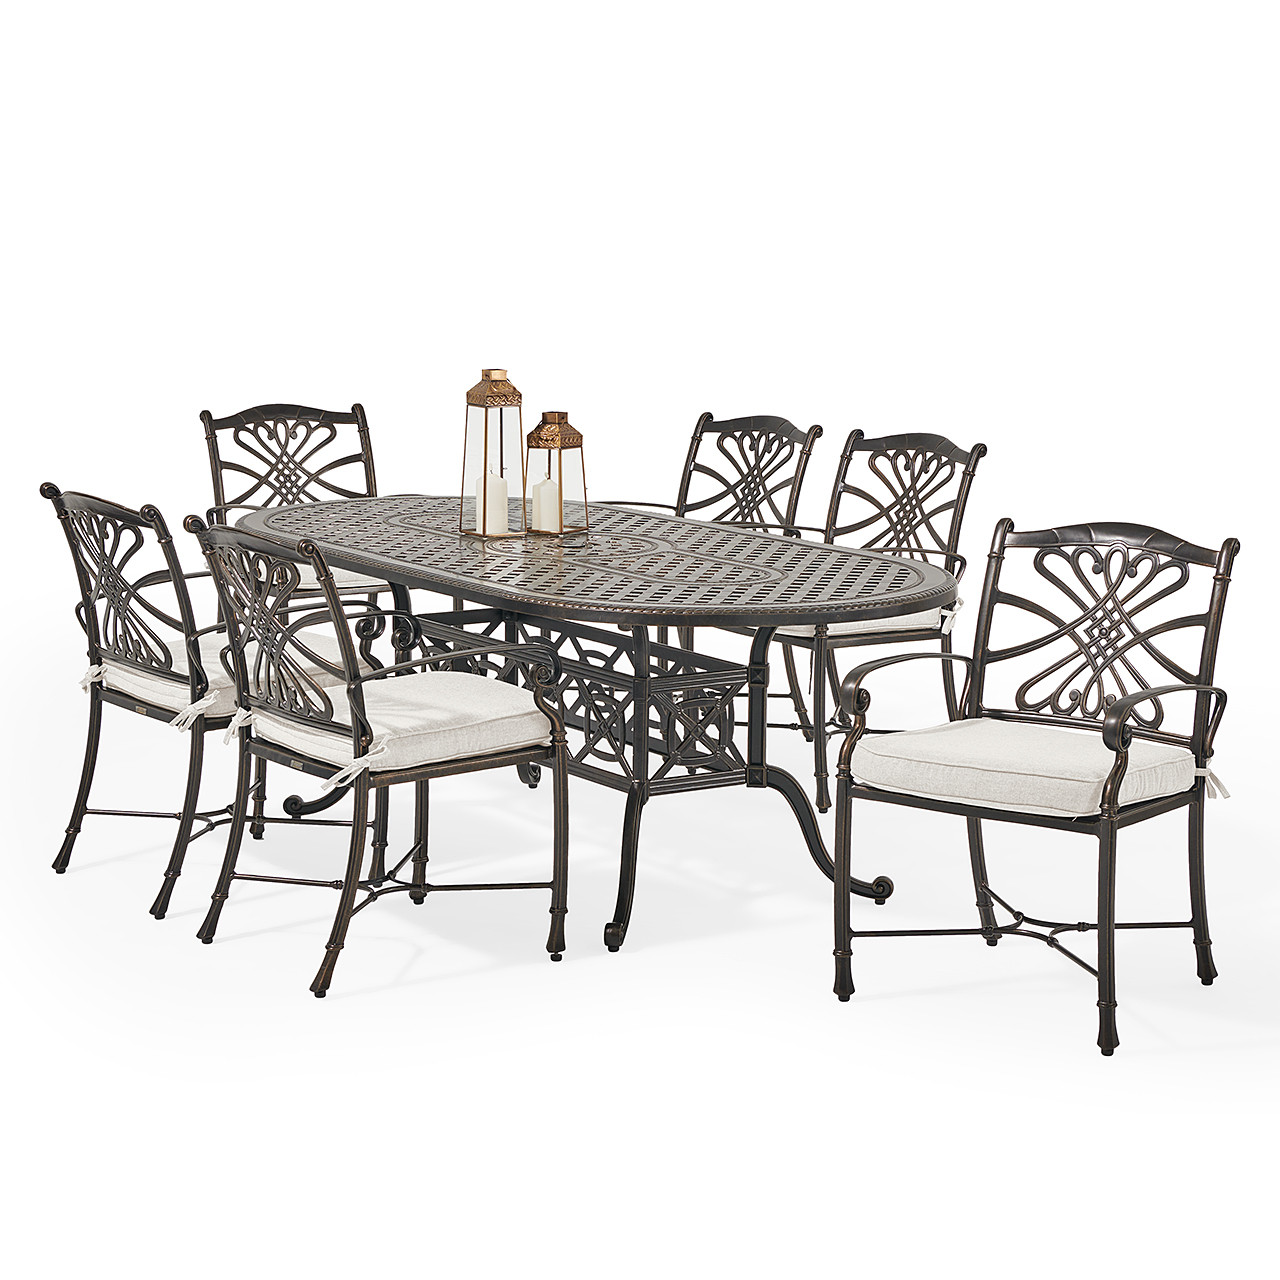 Melrose Midnight Gold Cast Aluminum with Cushions 7 Piece Dining Set + 86 x 42 in. Table